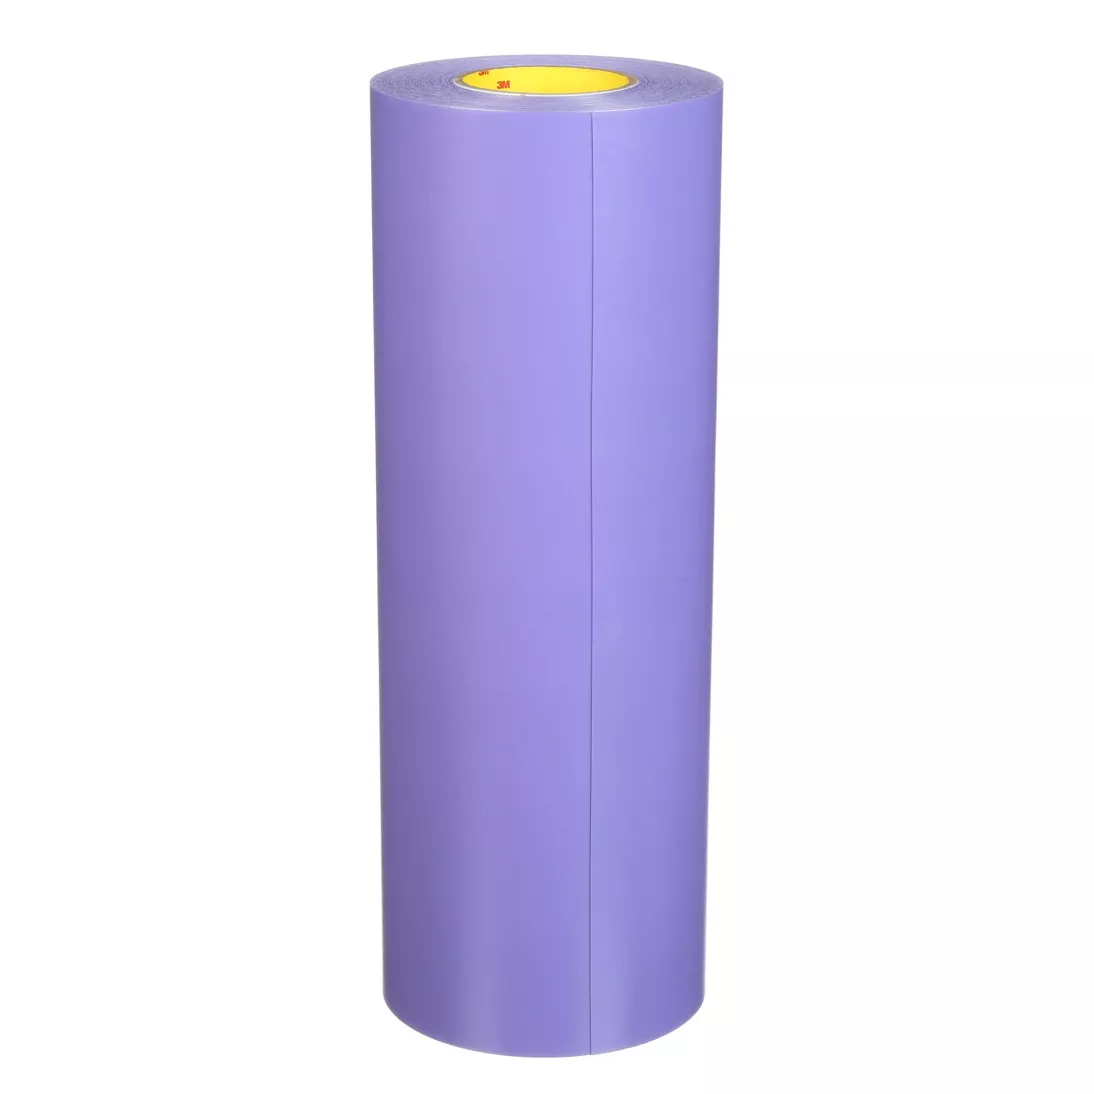 3M™ Cushion-Mount™ Plus Plate Mounting Tape E1520H, Purple, 18 in x 25
yd, 20 mil, 1 roll per case